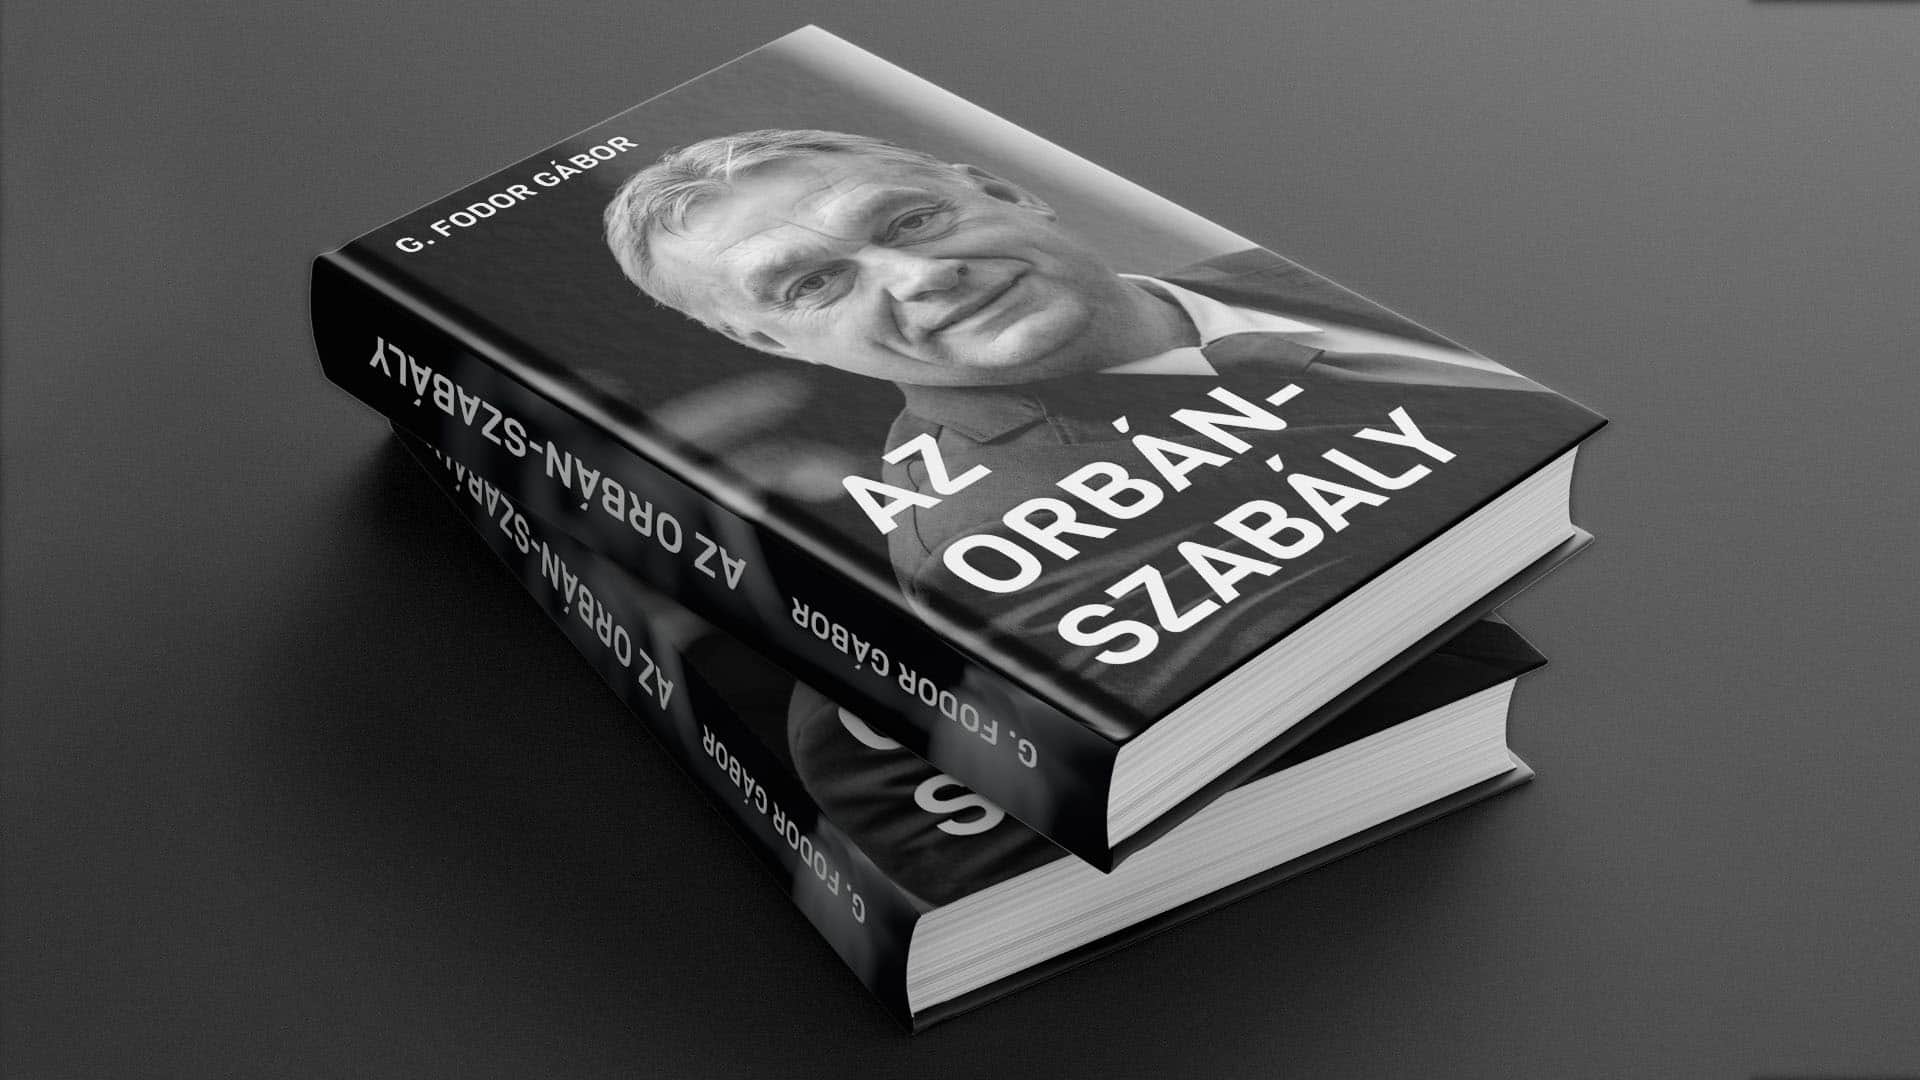 New Book 'The Orbán Rule' Provides Insight Into Right Wing PM’s Philosophy